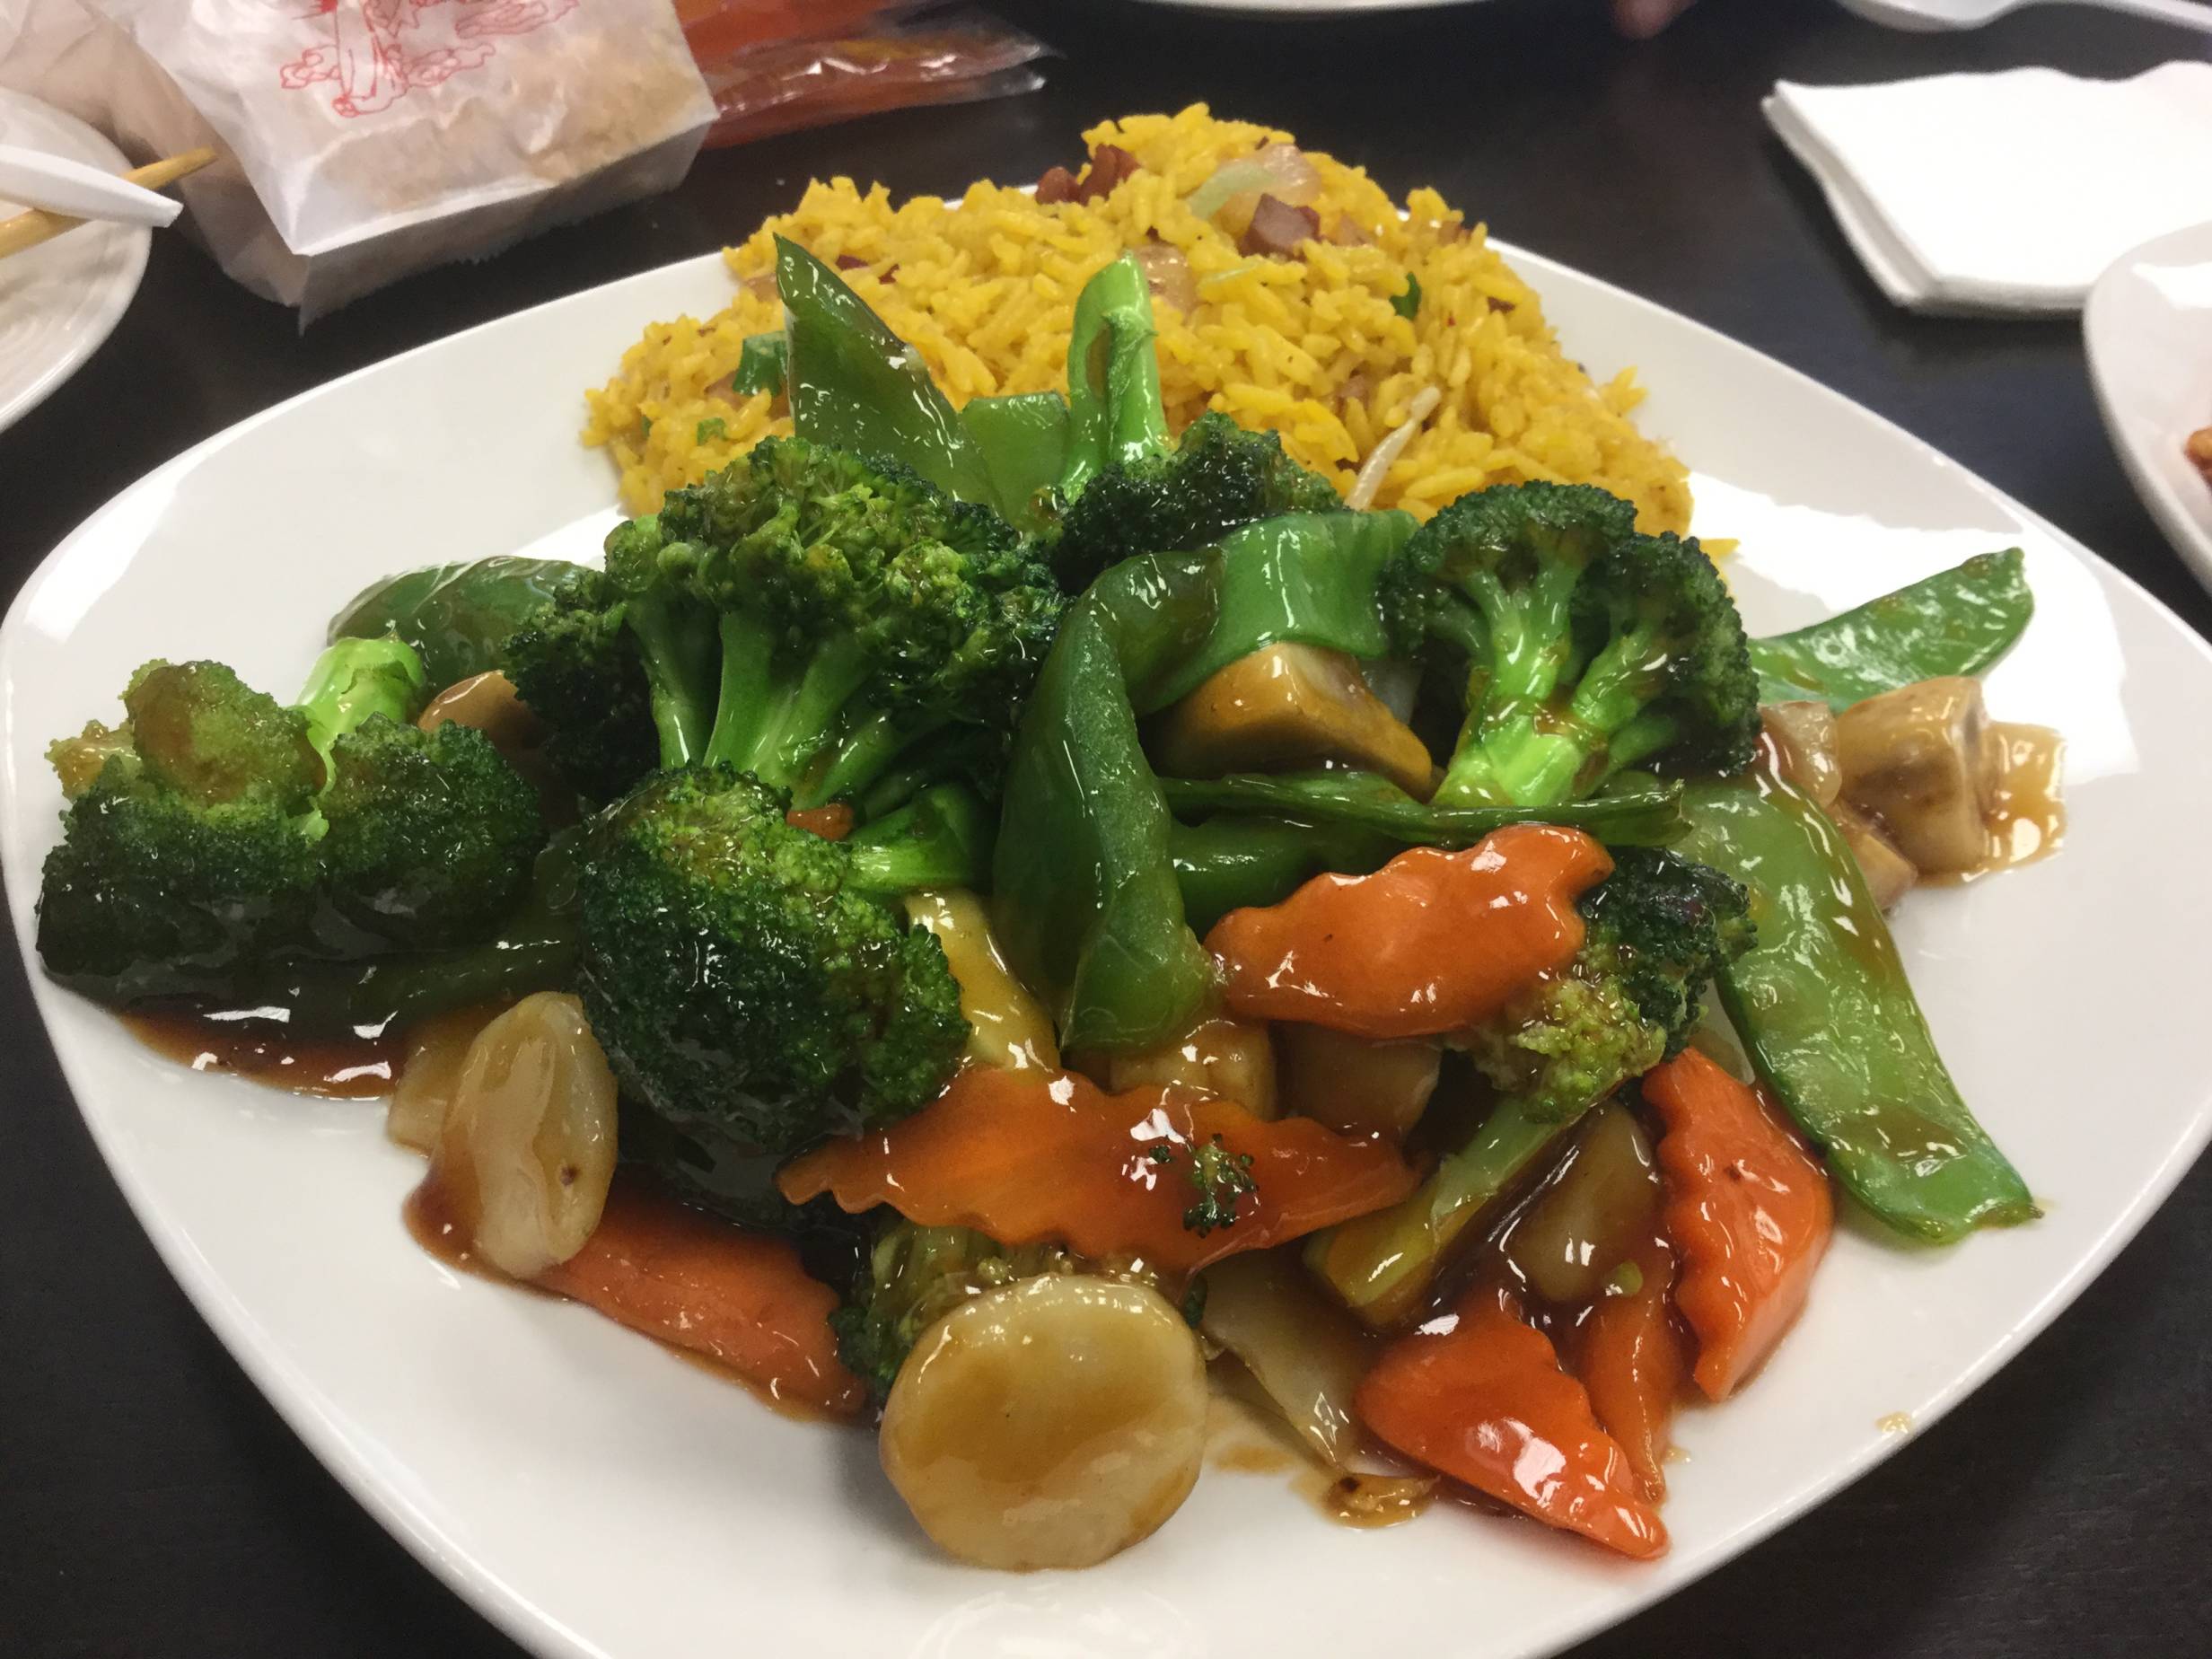 Flavor shines at First Wok in Urbana